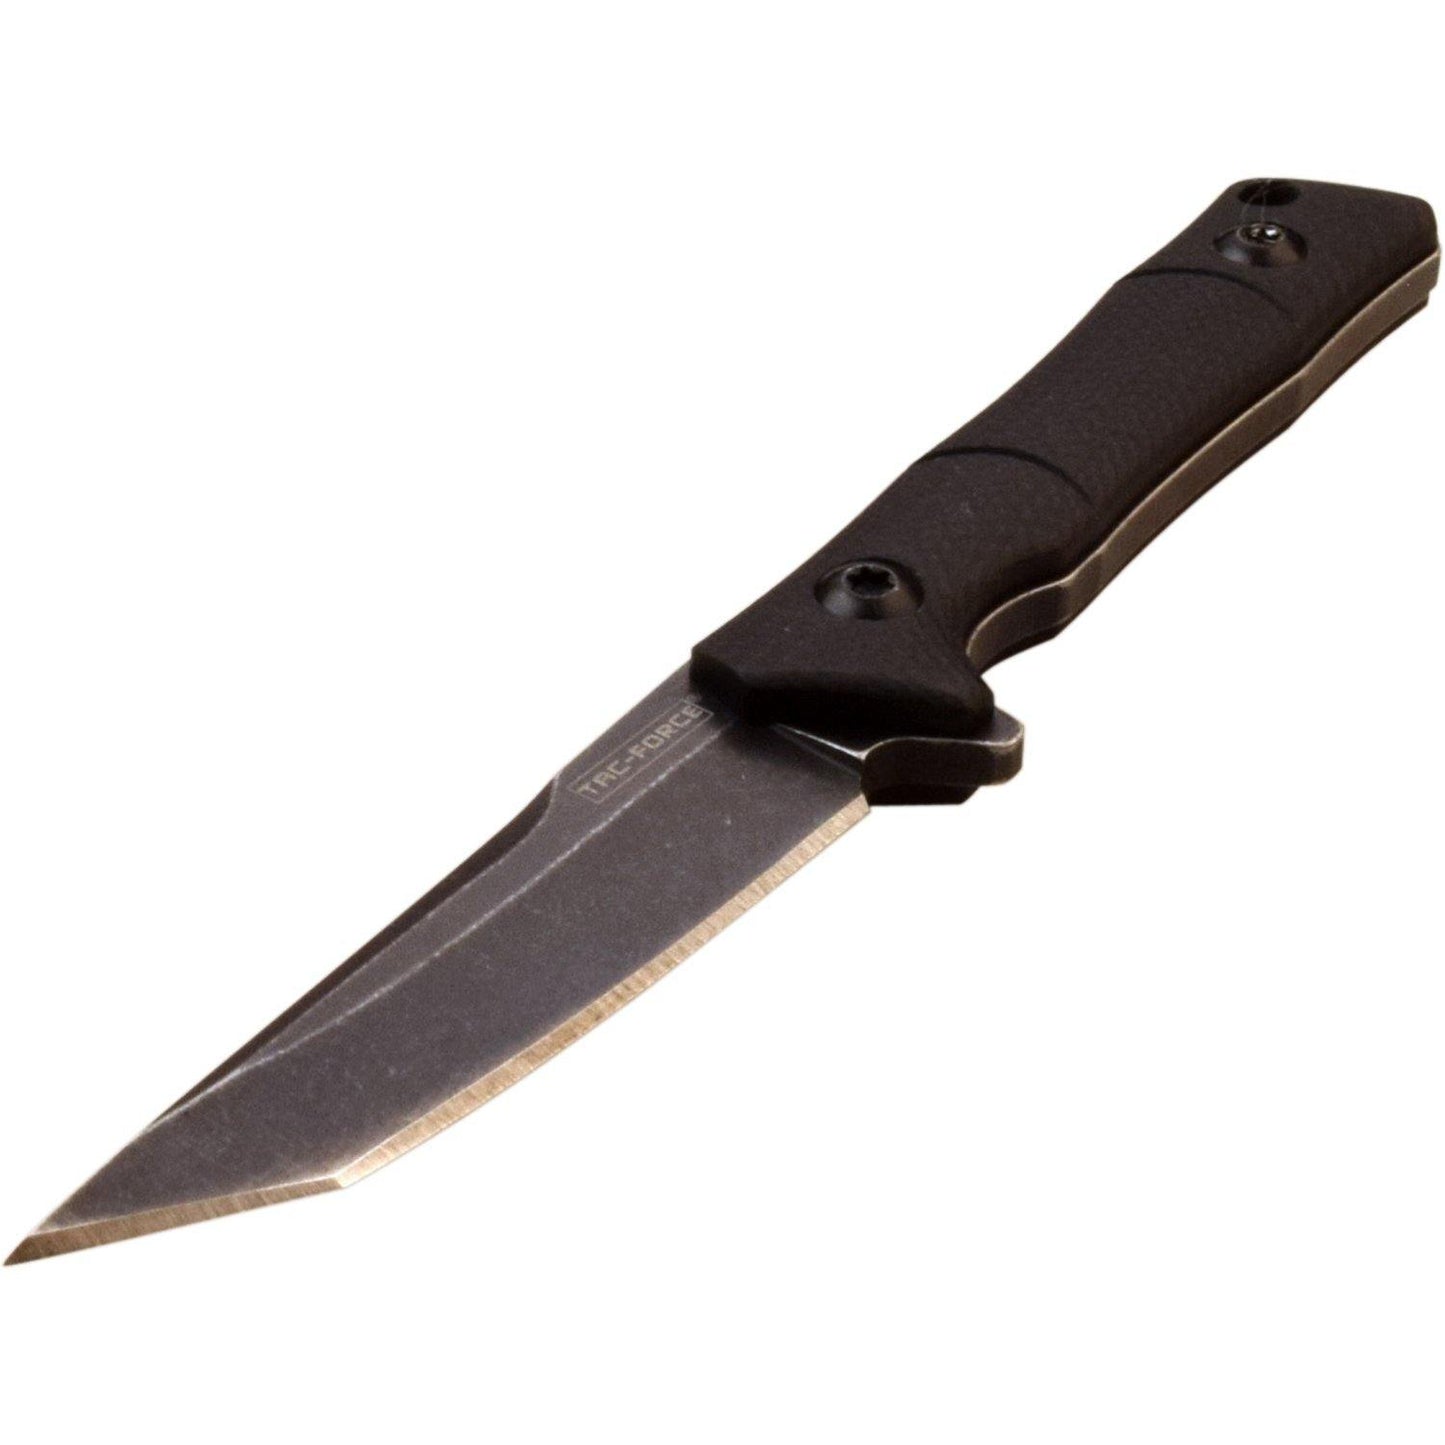 Tac-Force Tanto Tactical Fixed Blade Knife - G10 Handle 5 Inches Overall #tf-Fix003Bk - Xhunter New Zealand